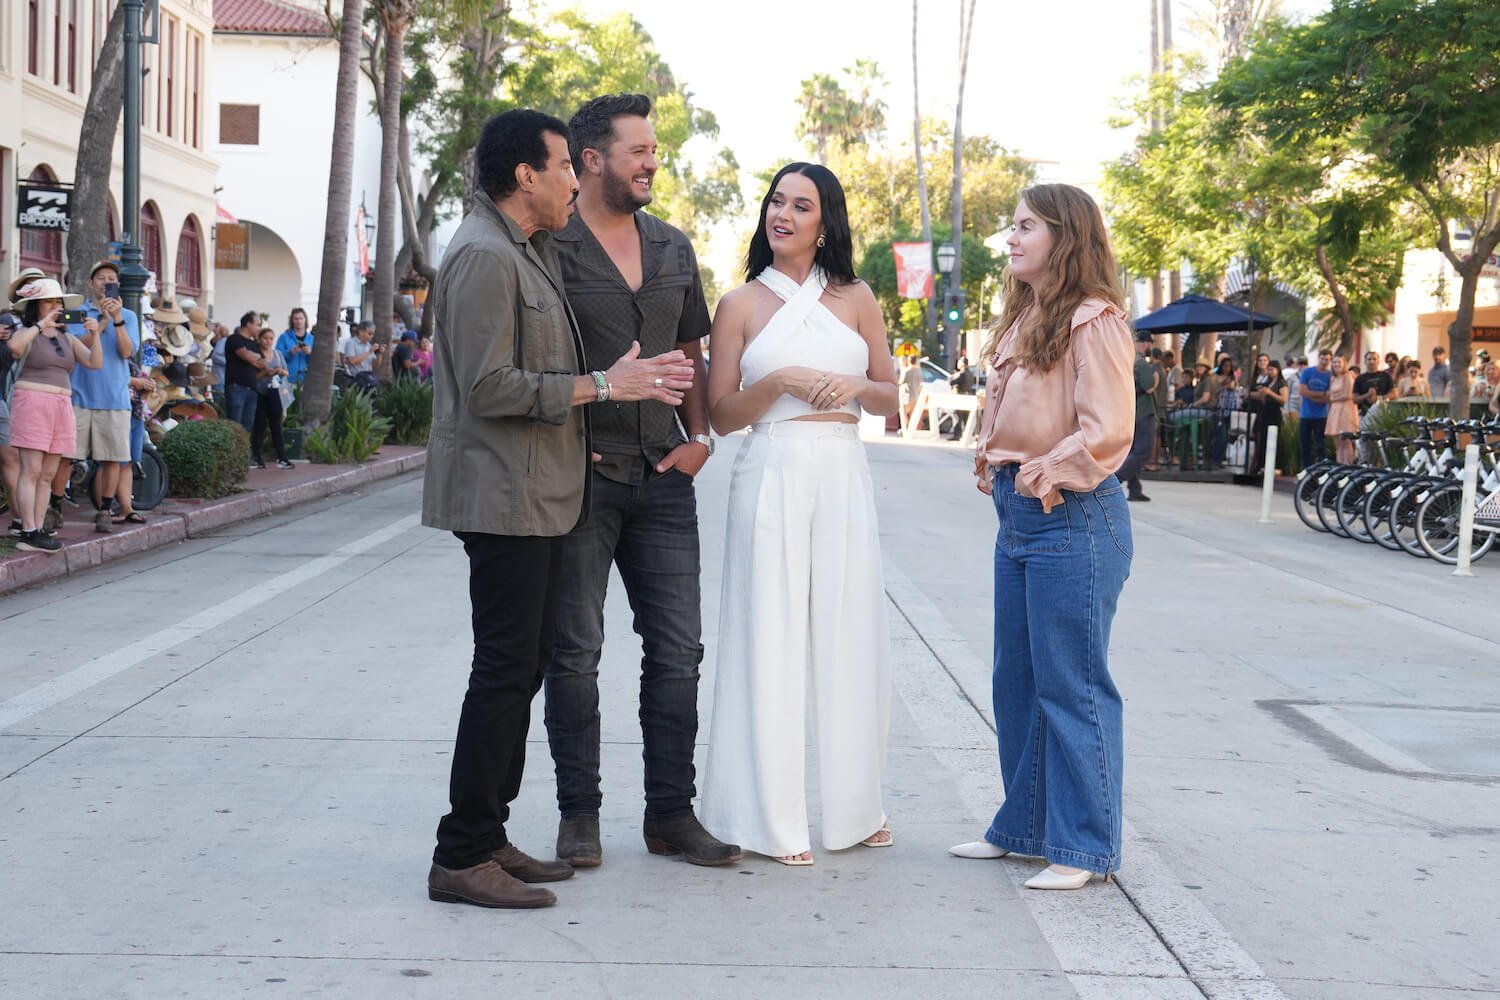 Lionel Richie, Luke Bryan, and Katy Perry speaking to a contestant outdoors